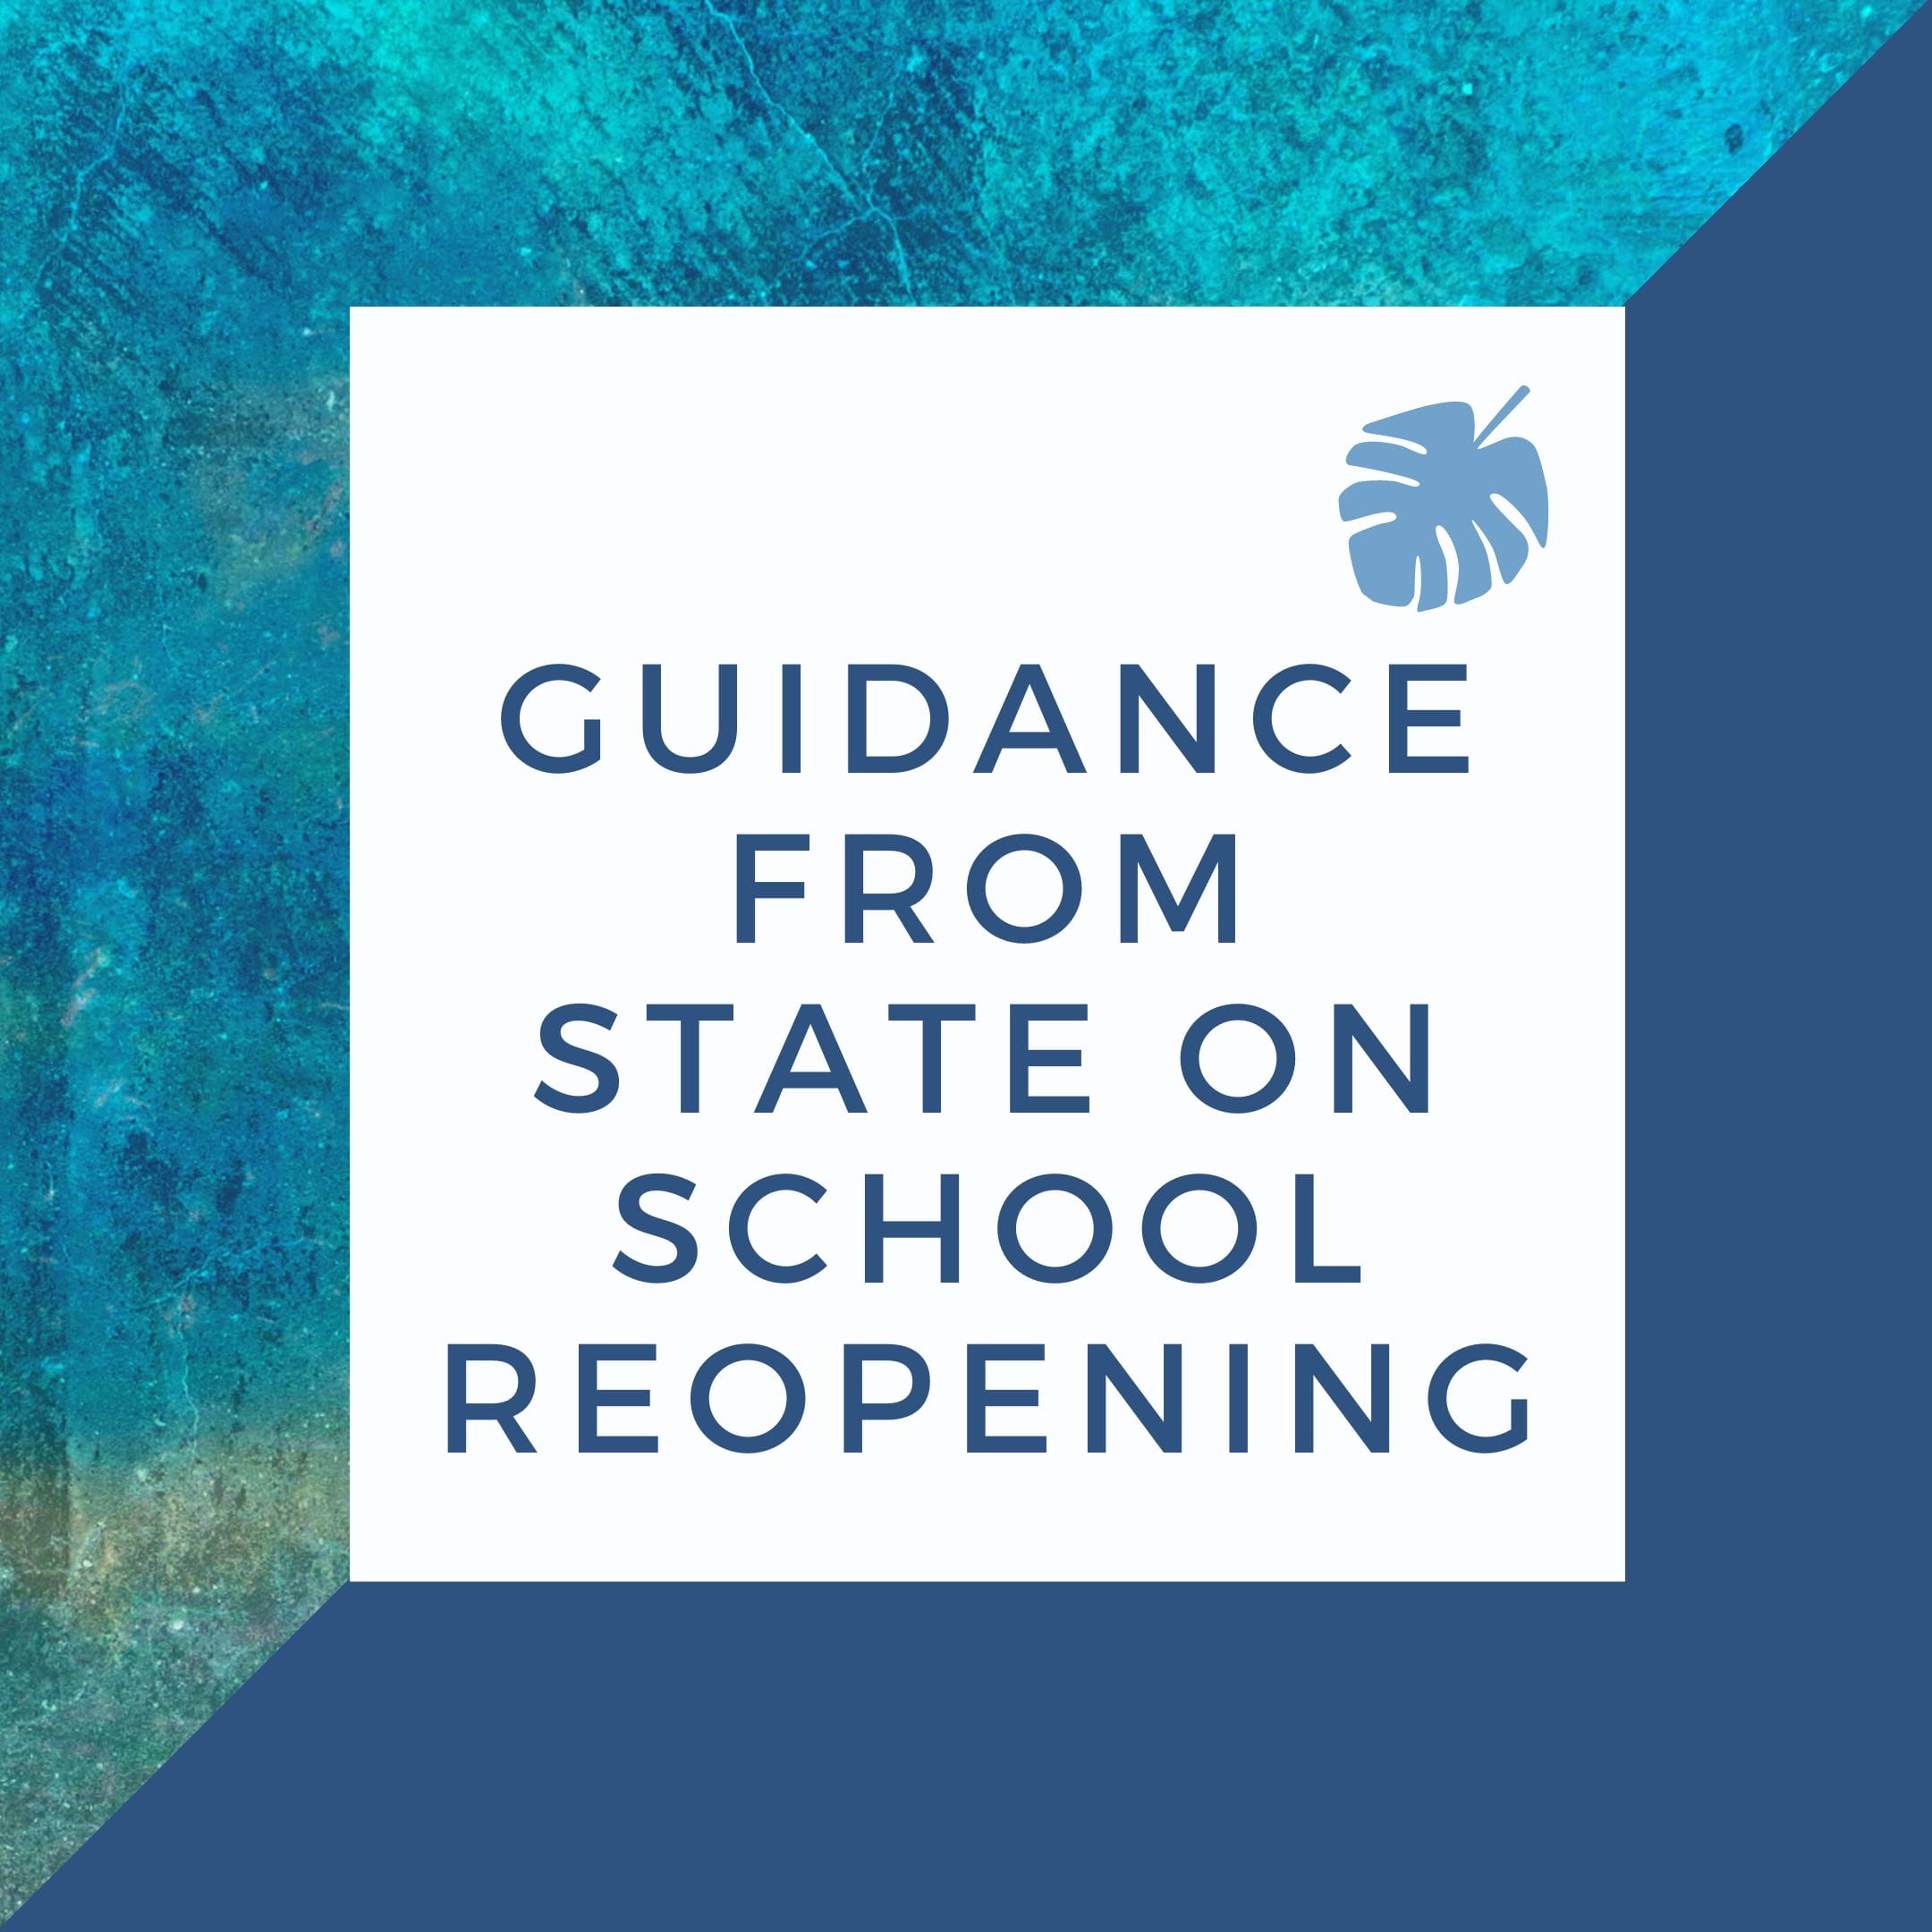 Guidance-from-State-on-School-Reopening